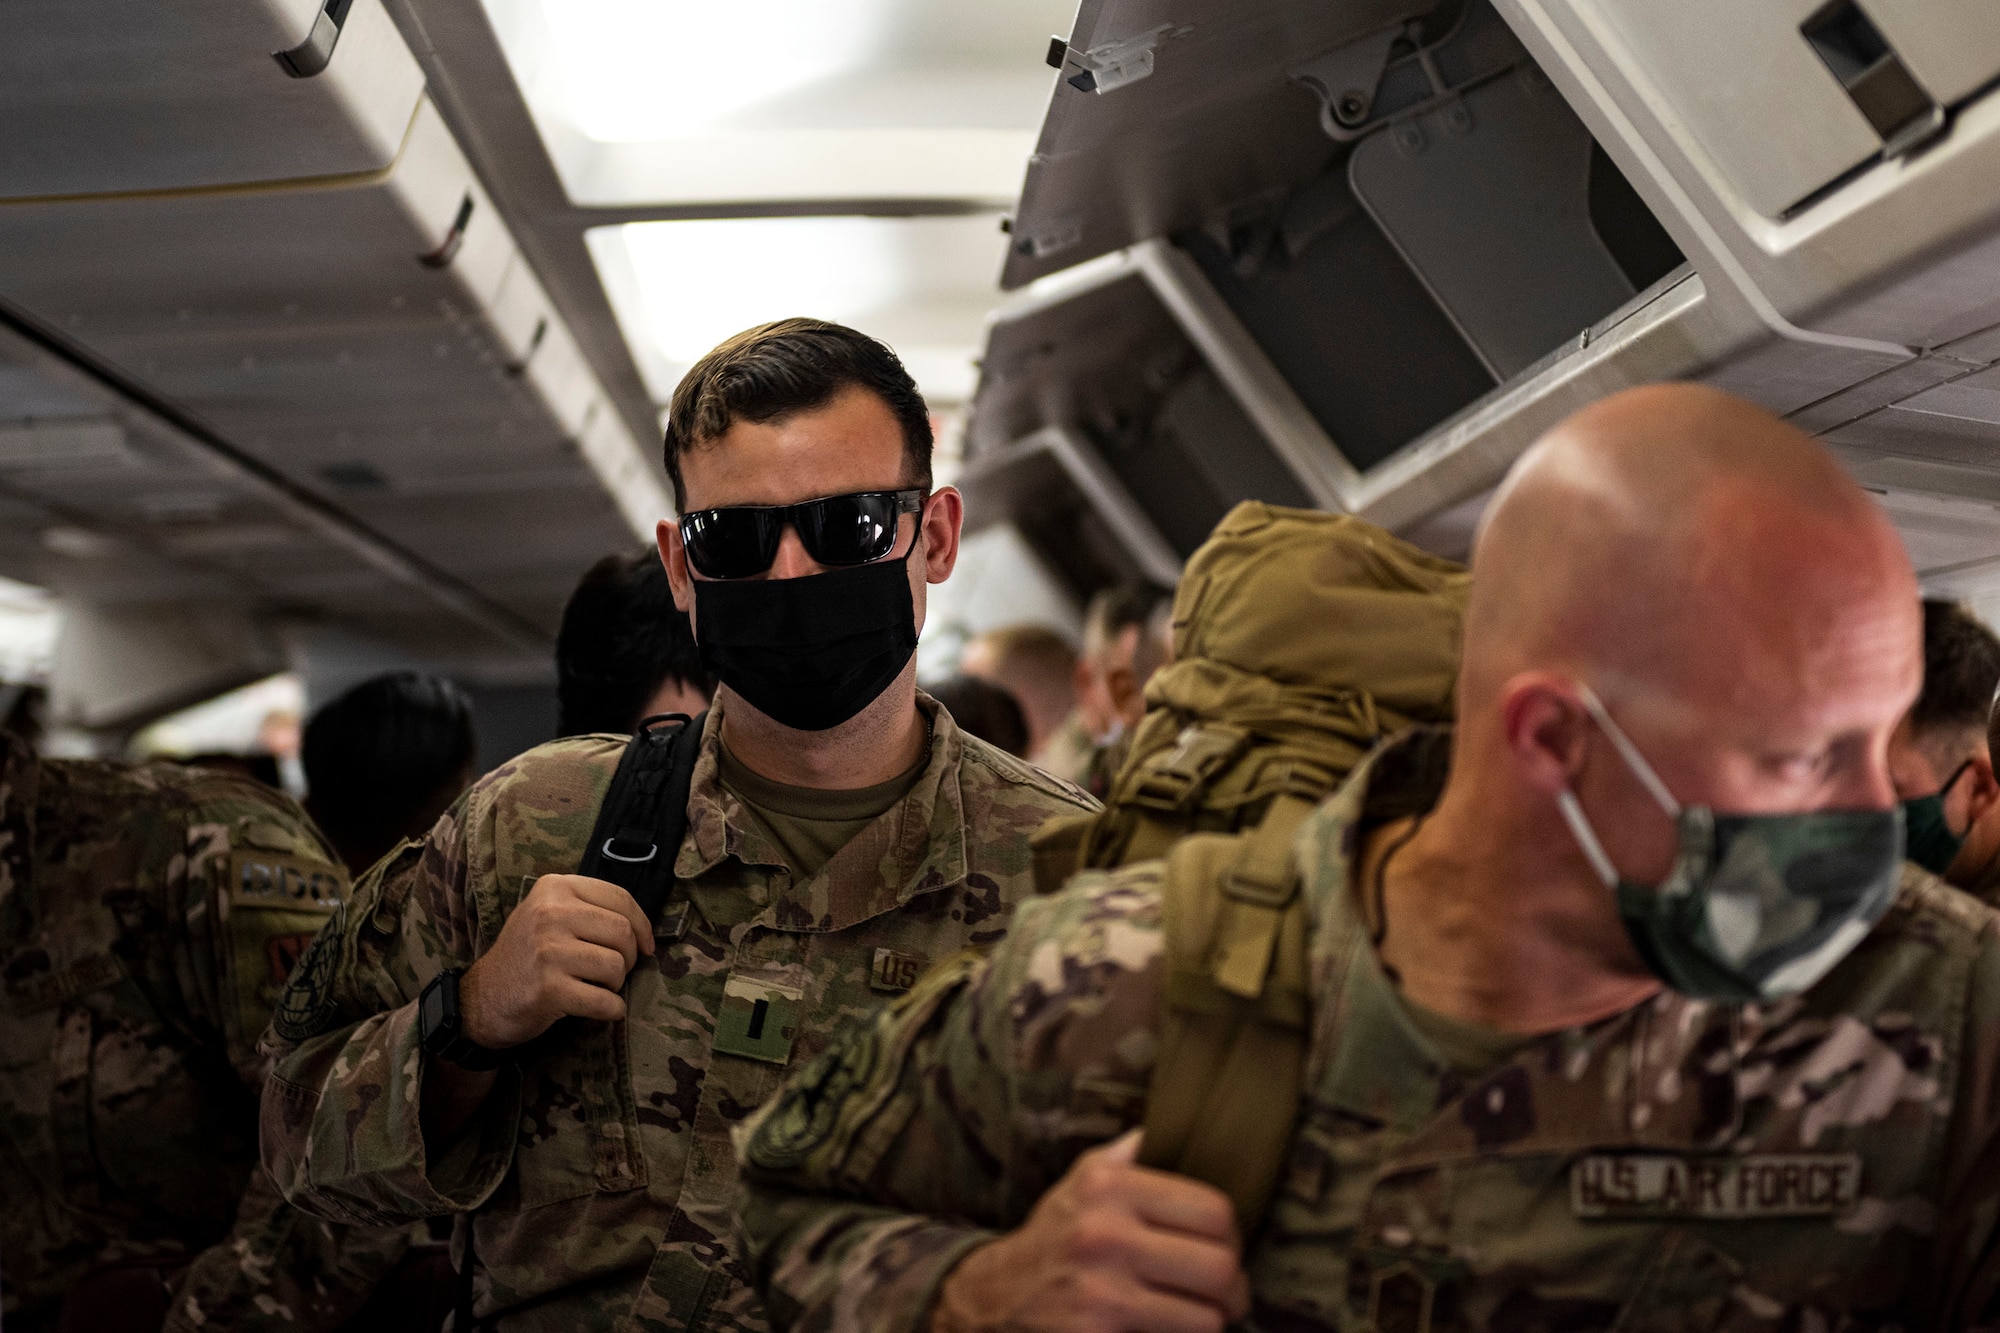 Photo of Airmen preparing to exit an aircraft.